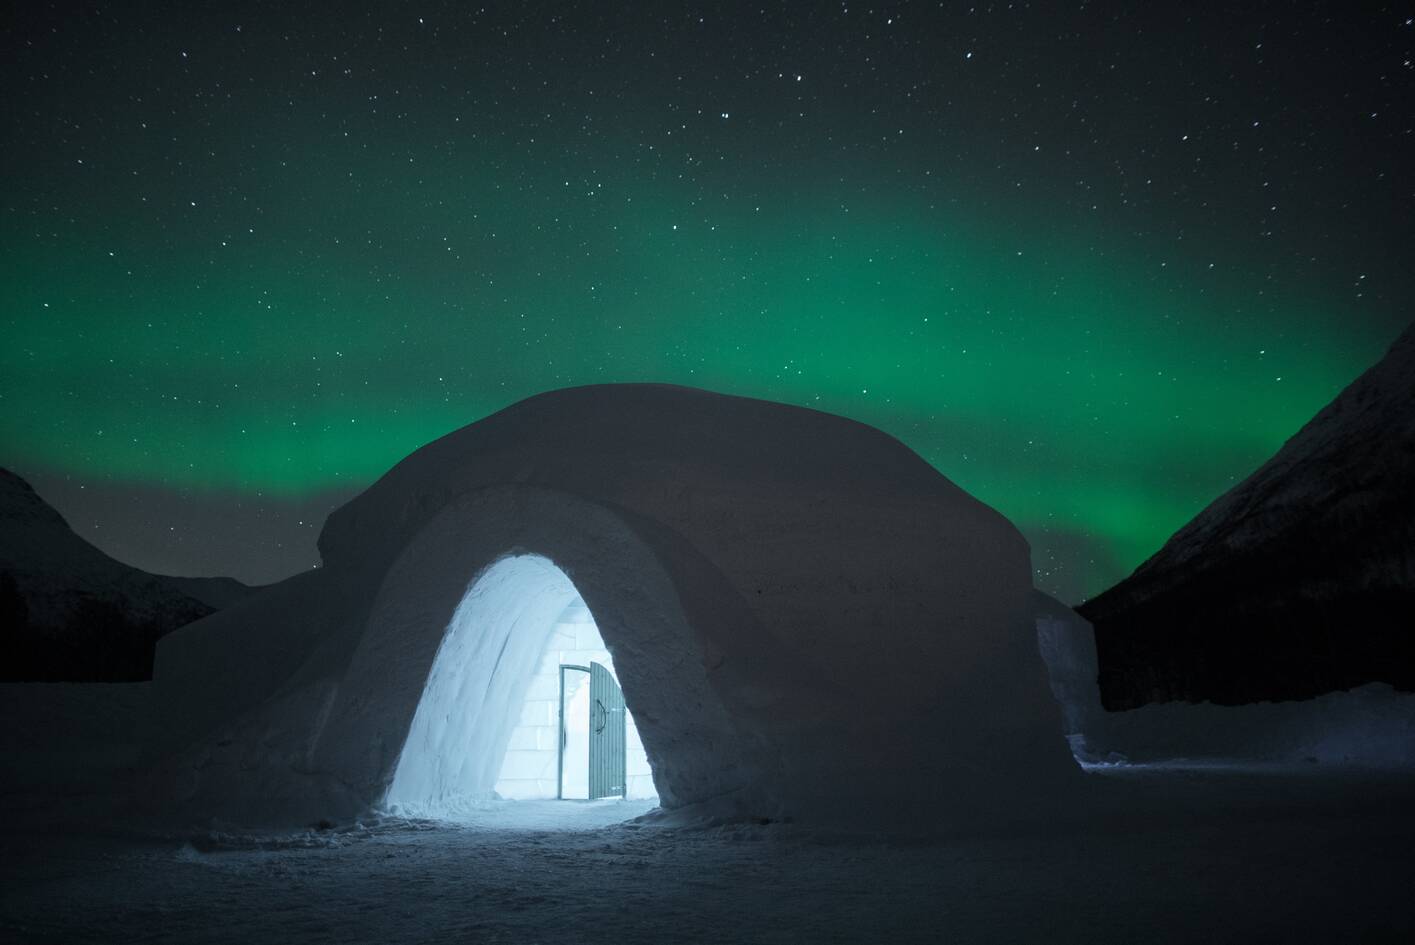 Tromso Ice Domes, where to stay in Tromso to watch an aurora display in style